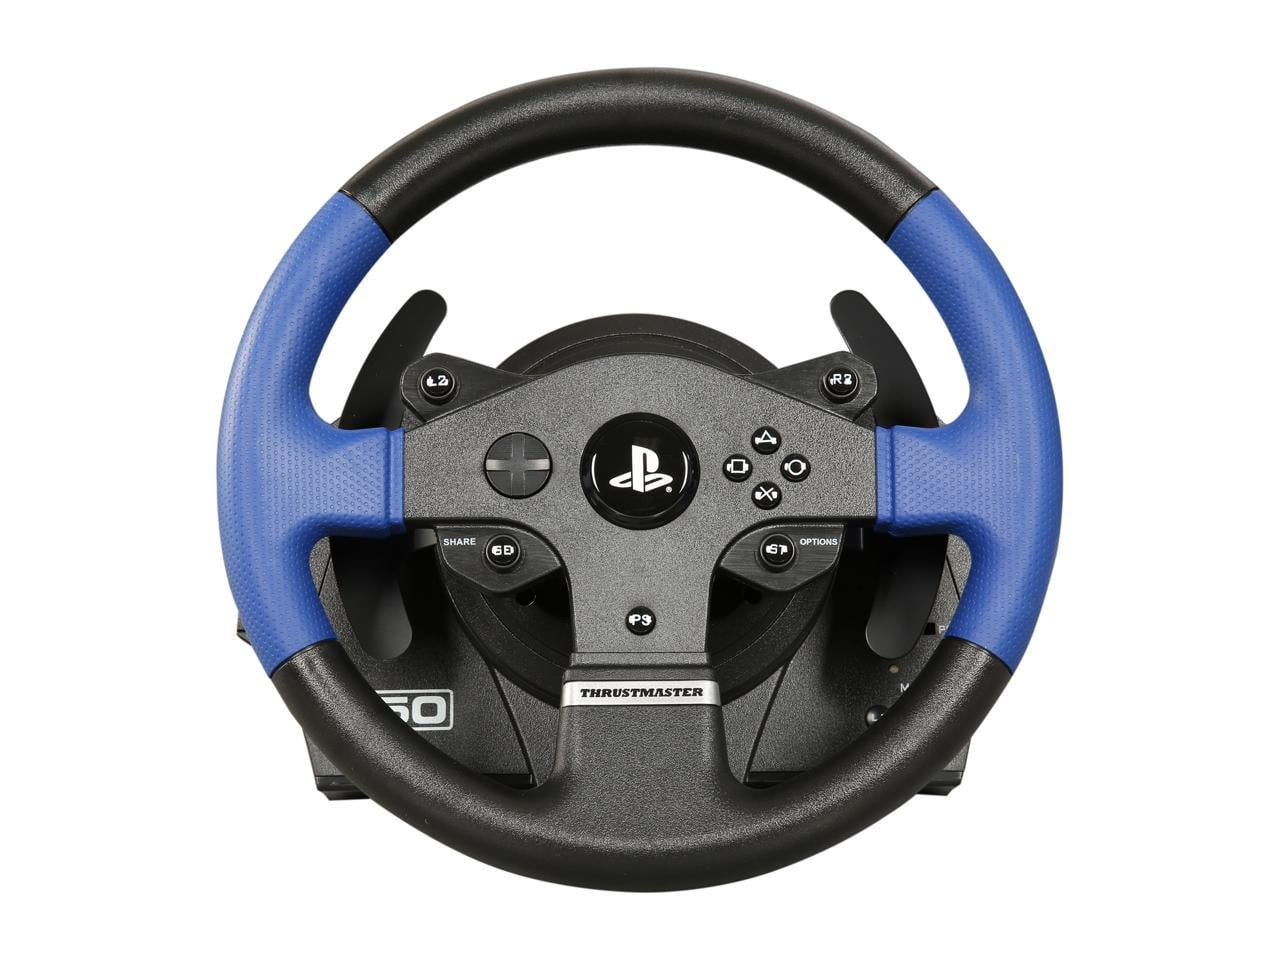 Thrustmaster T150 Rs Force Feedback Racing Wheel (PS5, PS4, PS3, PC) 